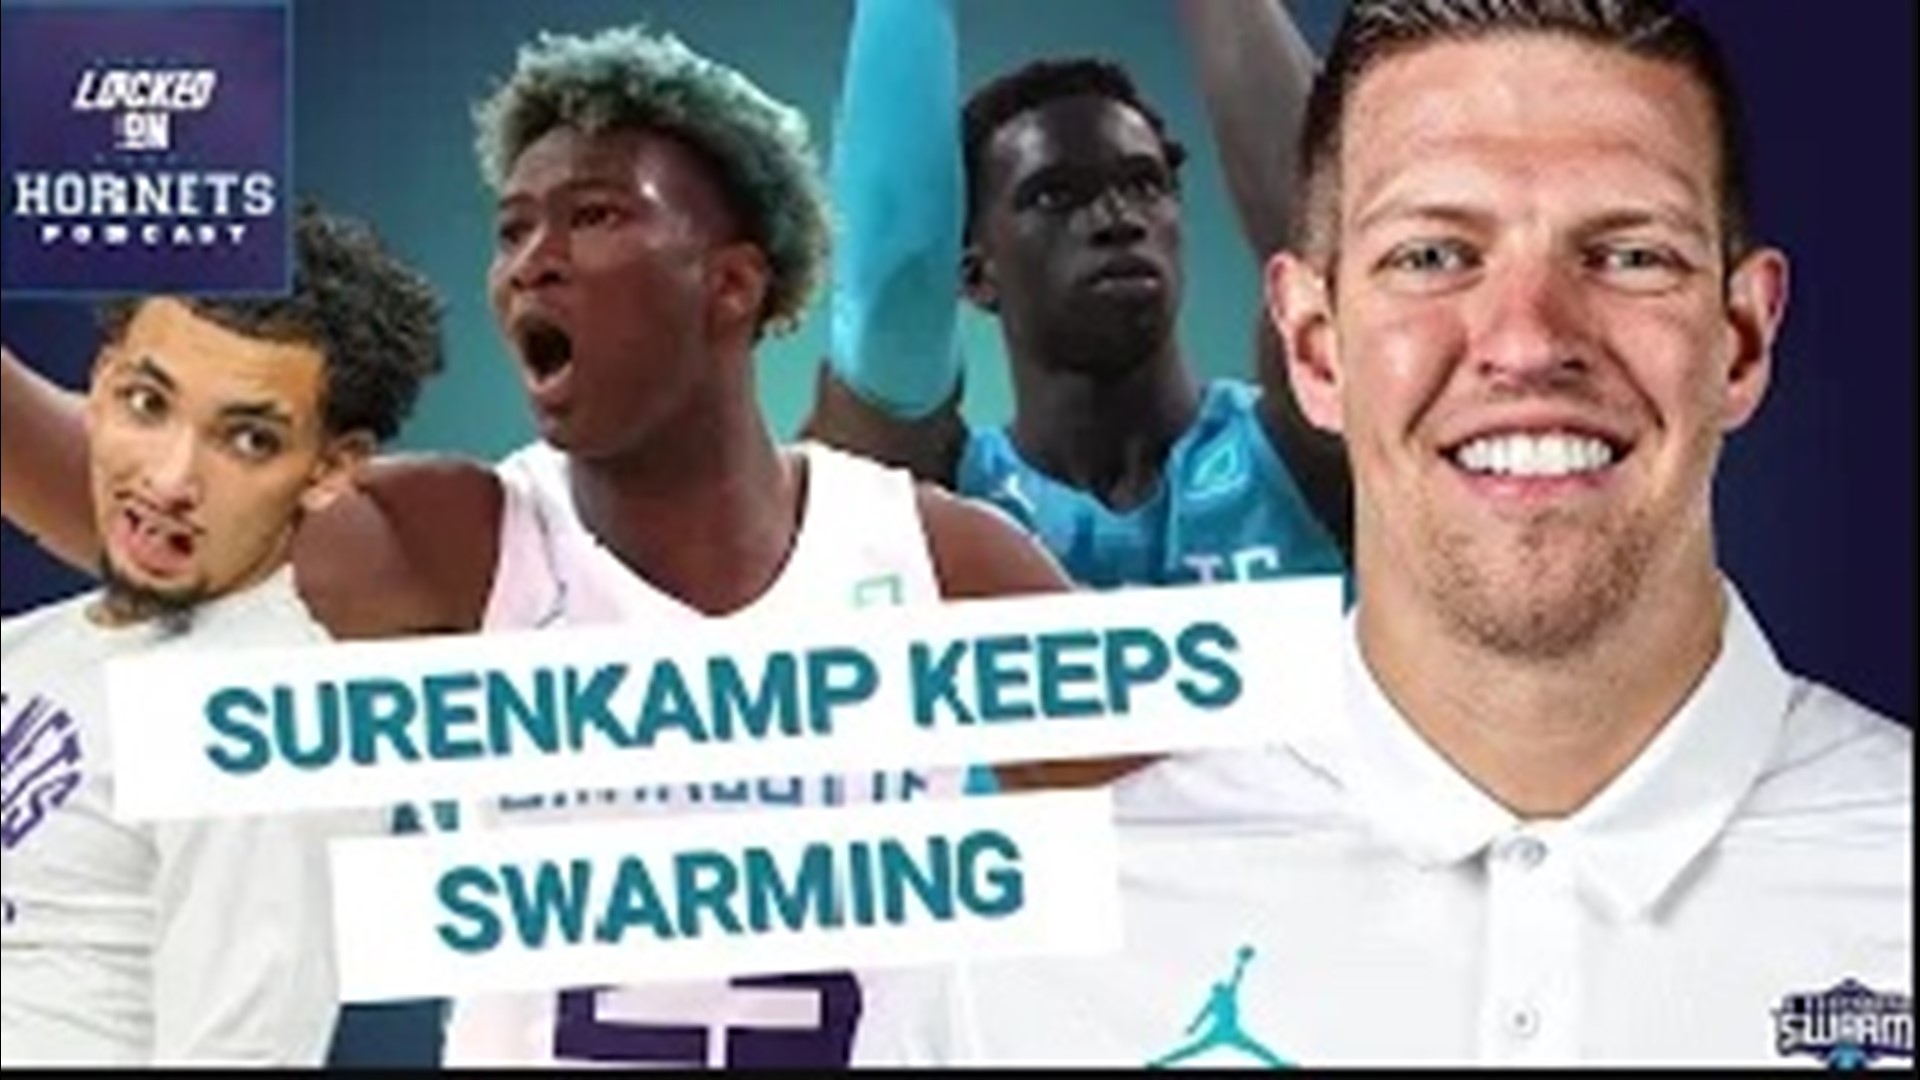 The Hornets retain the G-League Swarm head coach, Jordan Surenkamp. Plus, We begin a summer series called Who Wore it Best? That and more on Locked On Hornets!